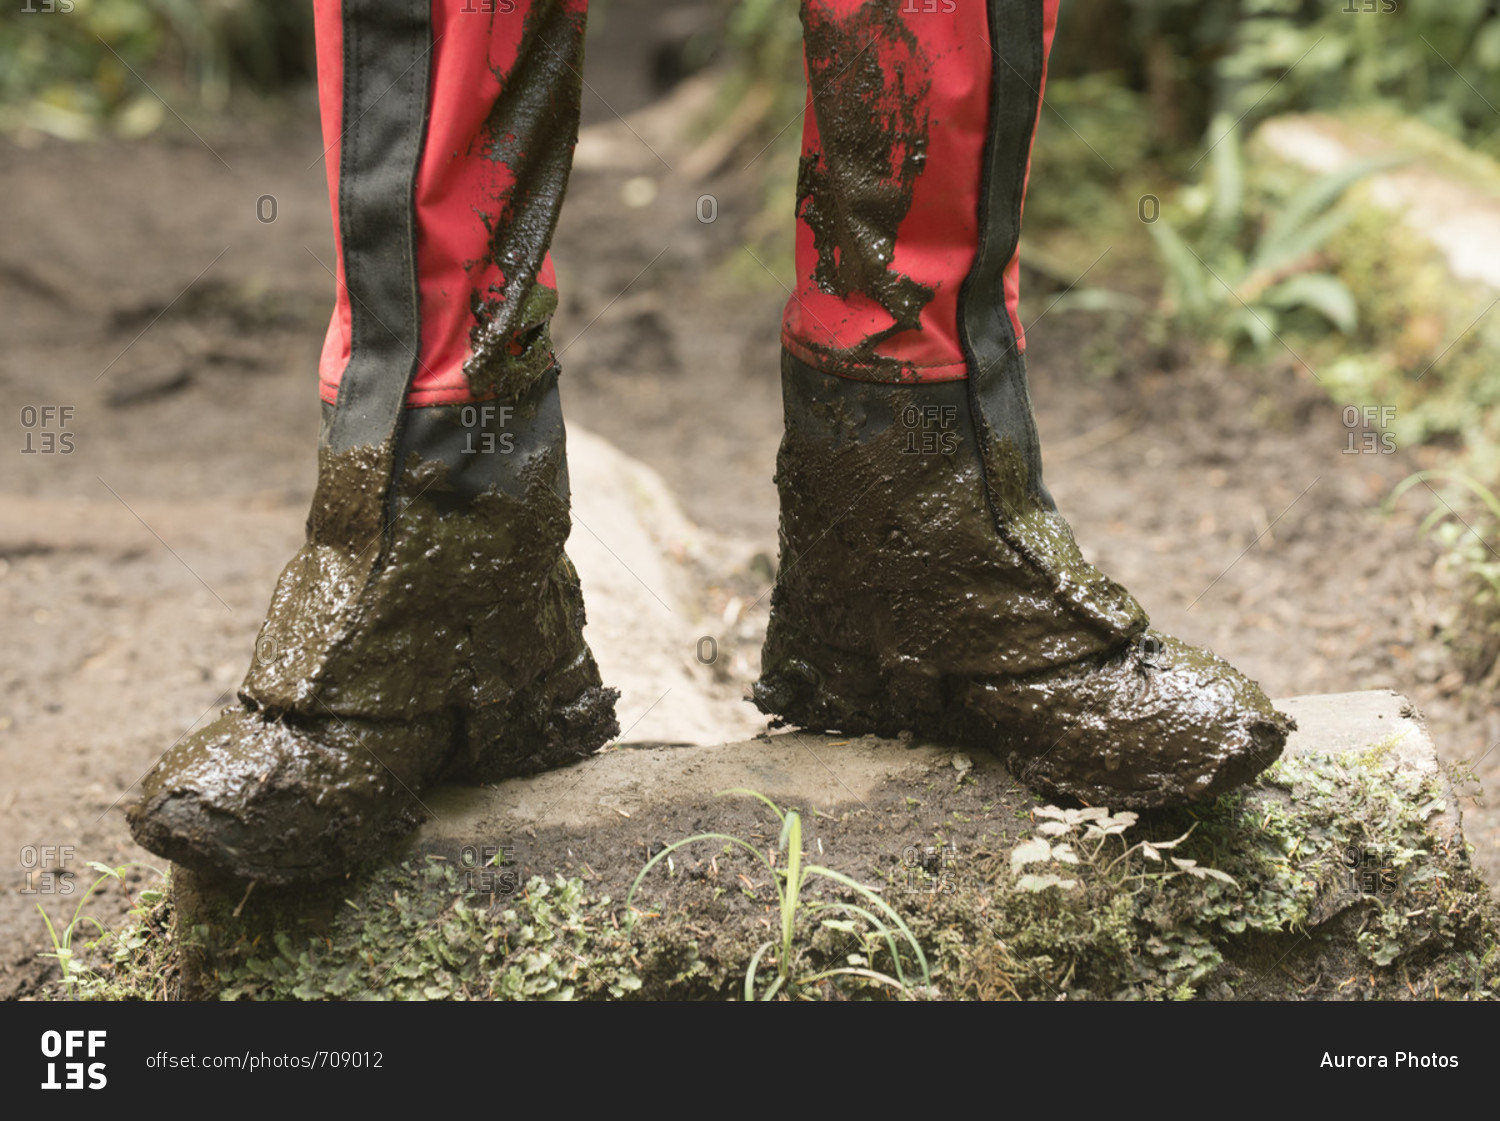 Muddy boots of backpacker, West Coast Trail, British Columbia, Canada